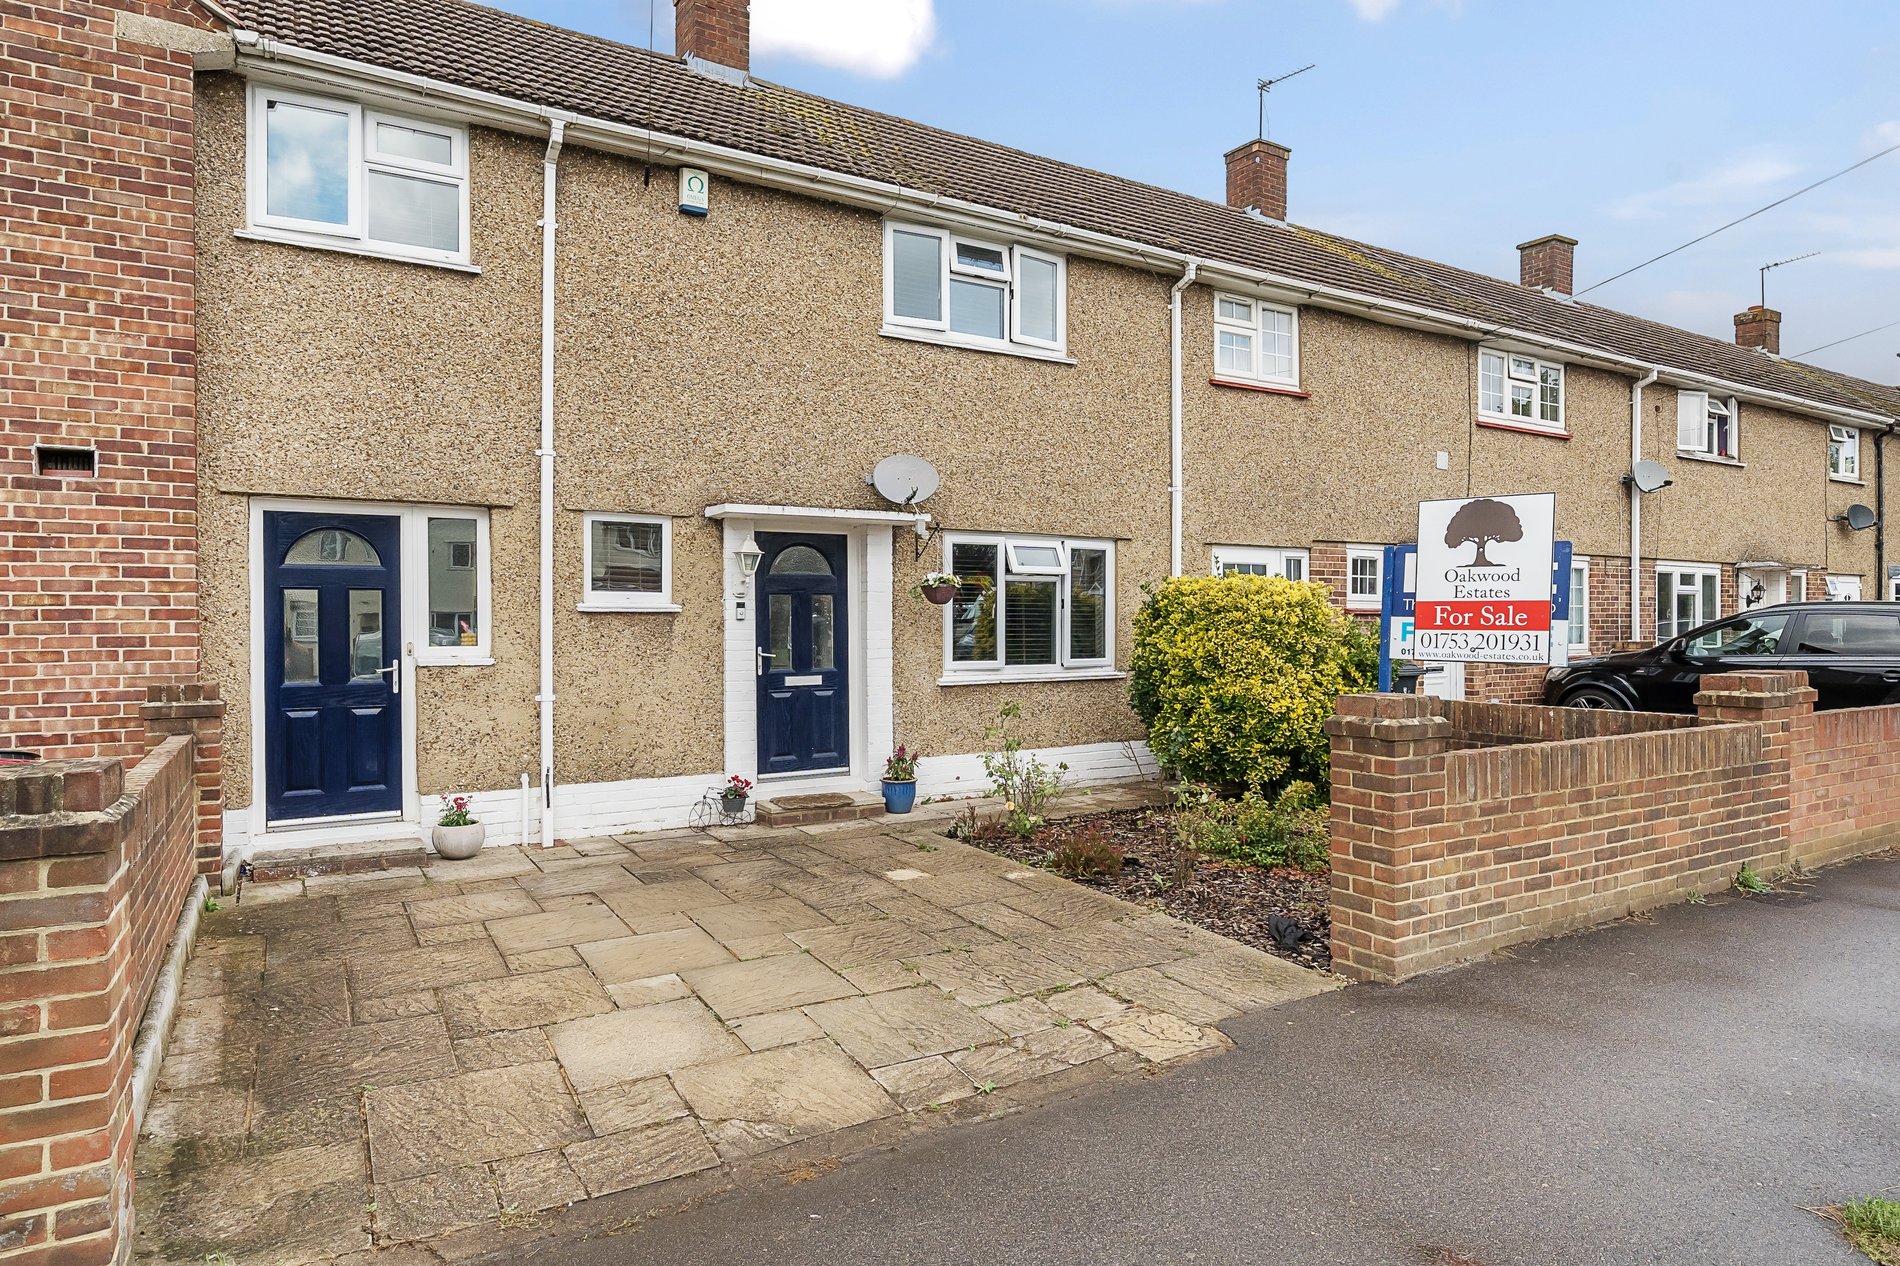 3 bed terraced house for sale in Berryfield, Slough - Property Image 1